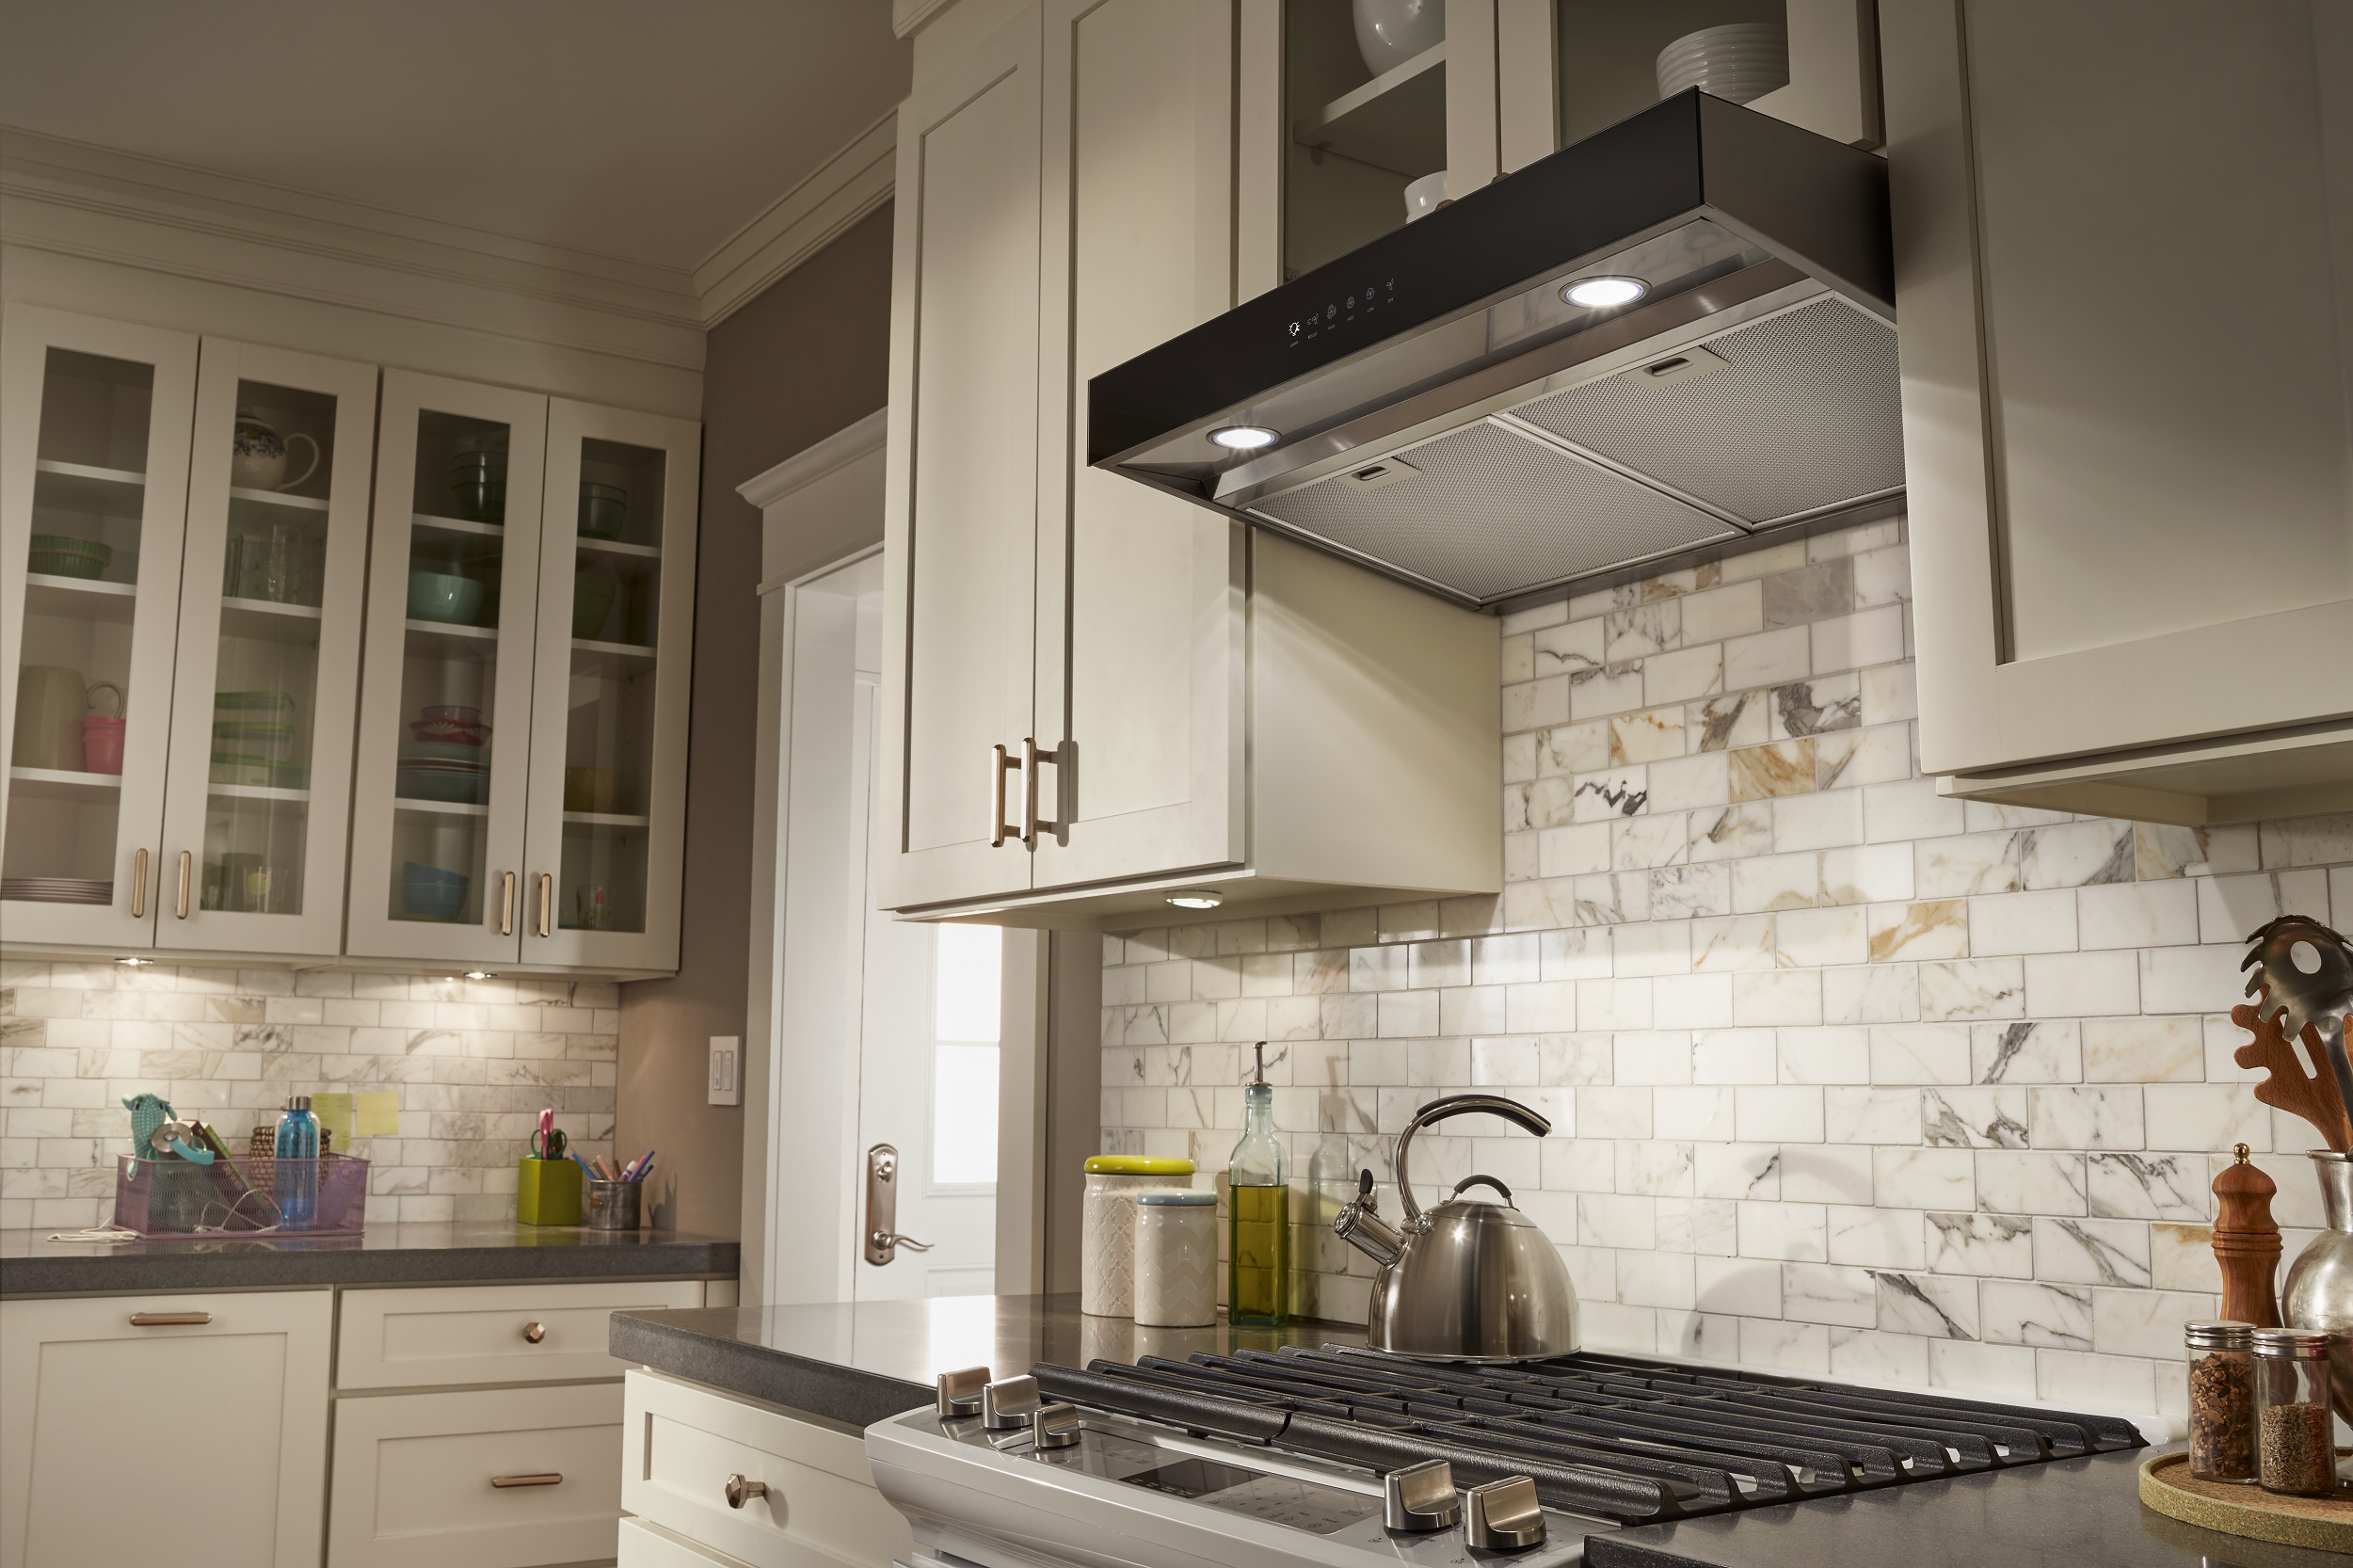 Shop the Best Selection of 36 rear vent range hood Products